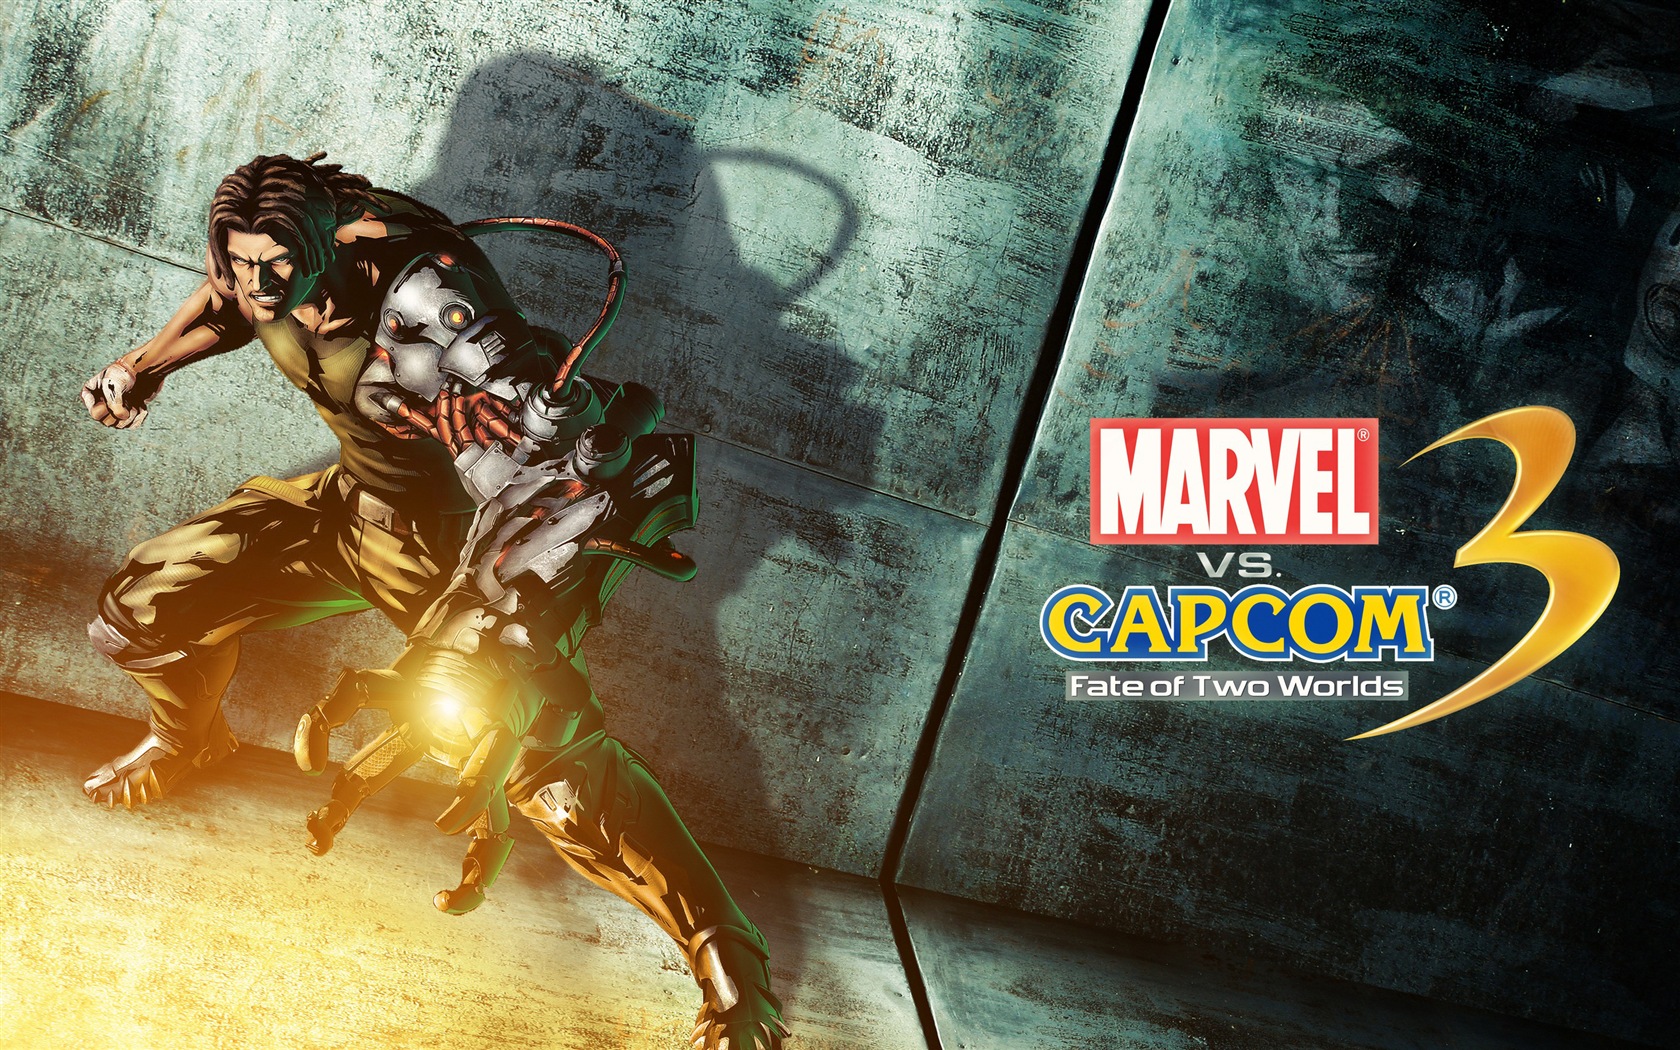 Marvel VS. Capcom 3: Fate of Two Worlds HD game wallpapers #8 - 1680x1050